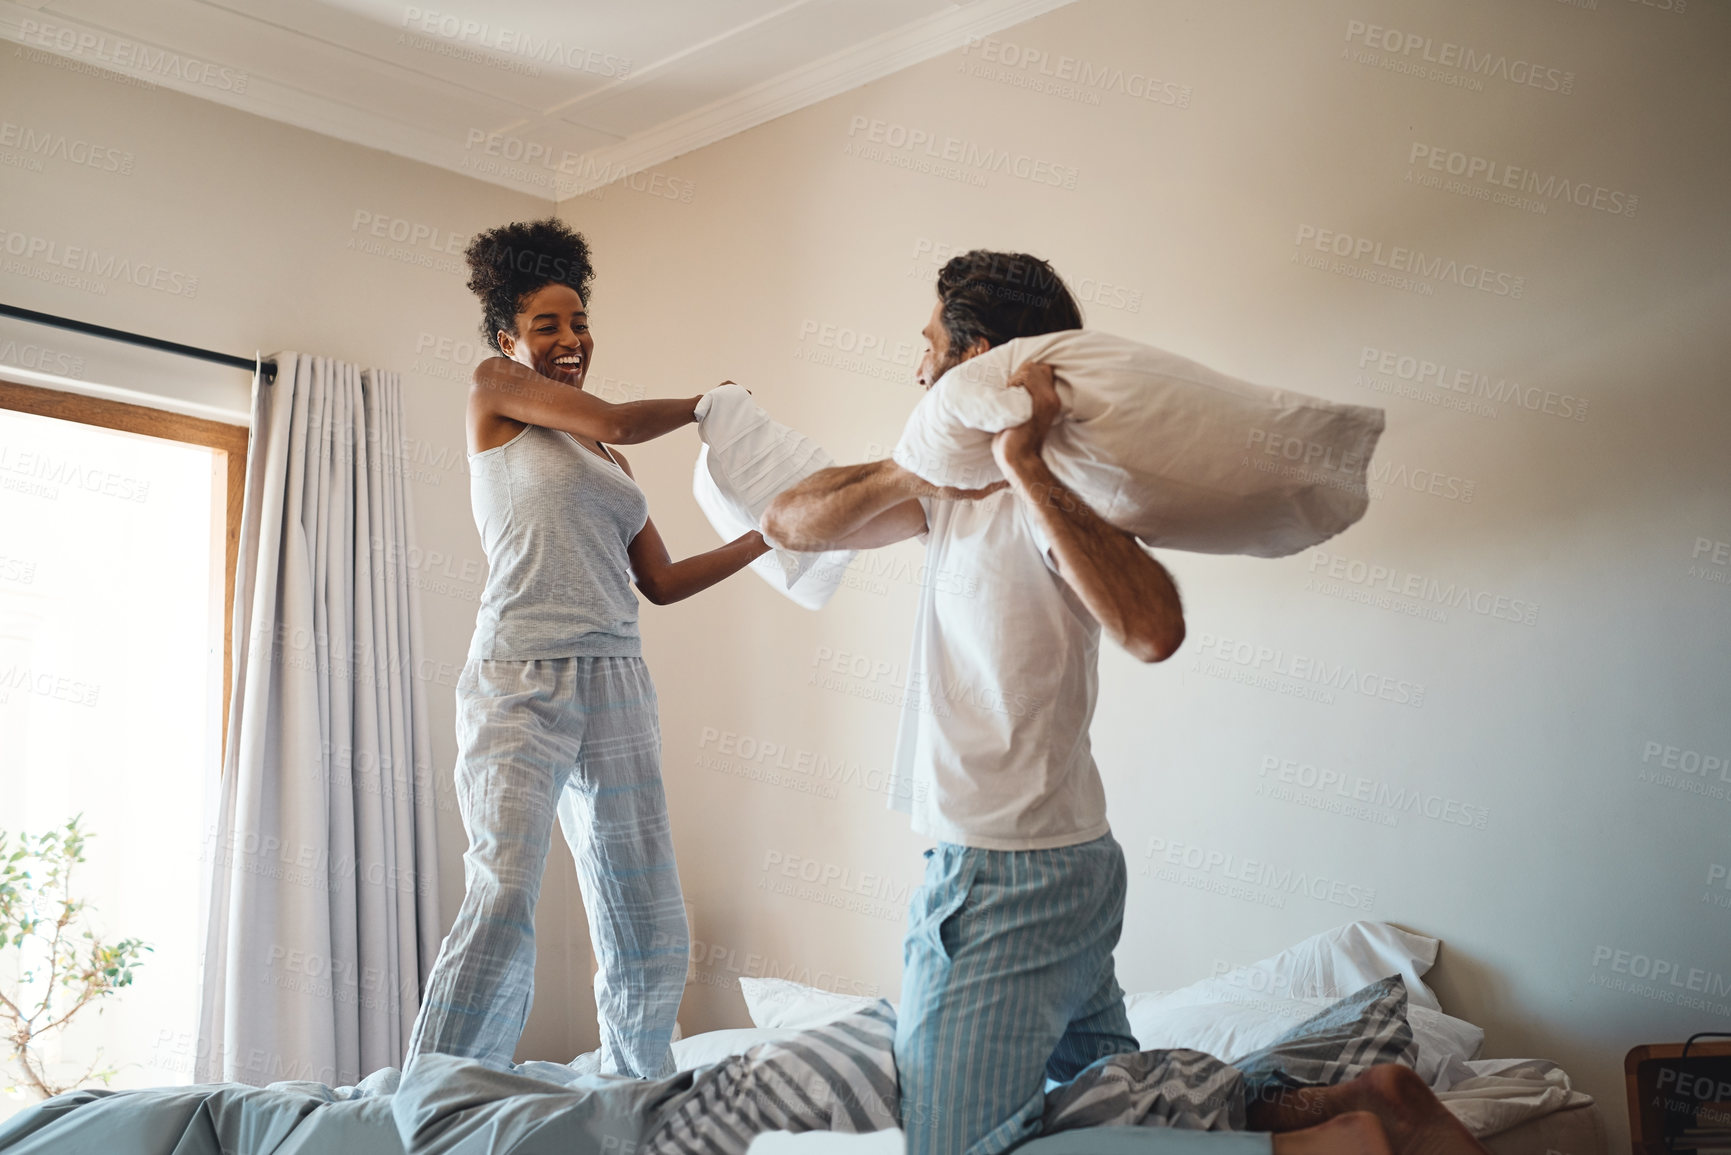 Buy stock photo Pillow fight, playing and bonding with a happy couple playing, bonding and spending time together in their bedroom at home. Laughing, having fun and feeling carefree in pyjamas over the weekend